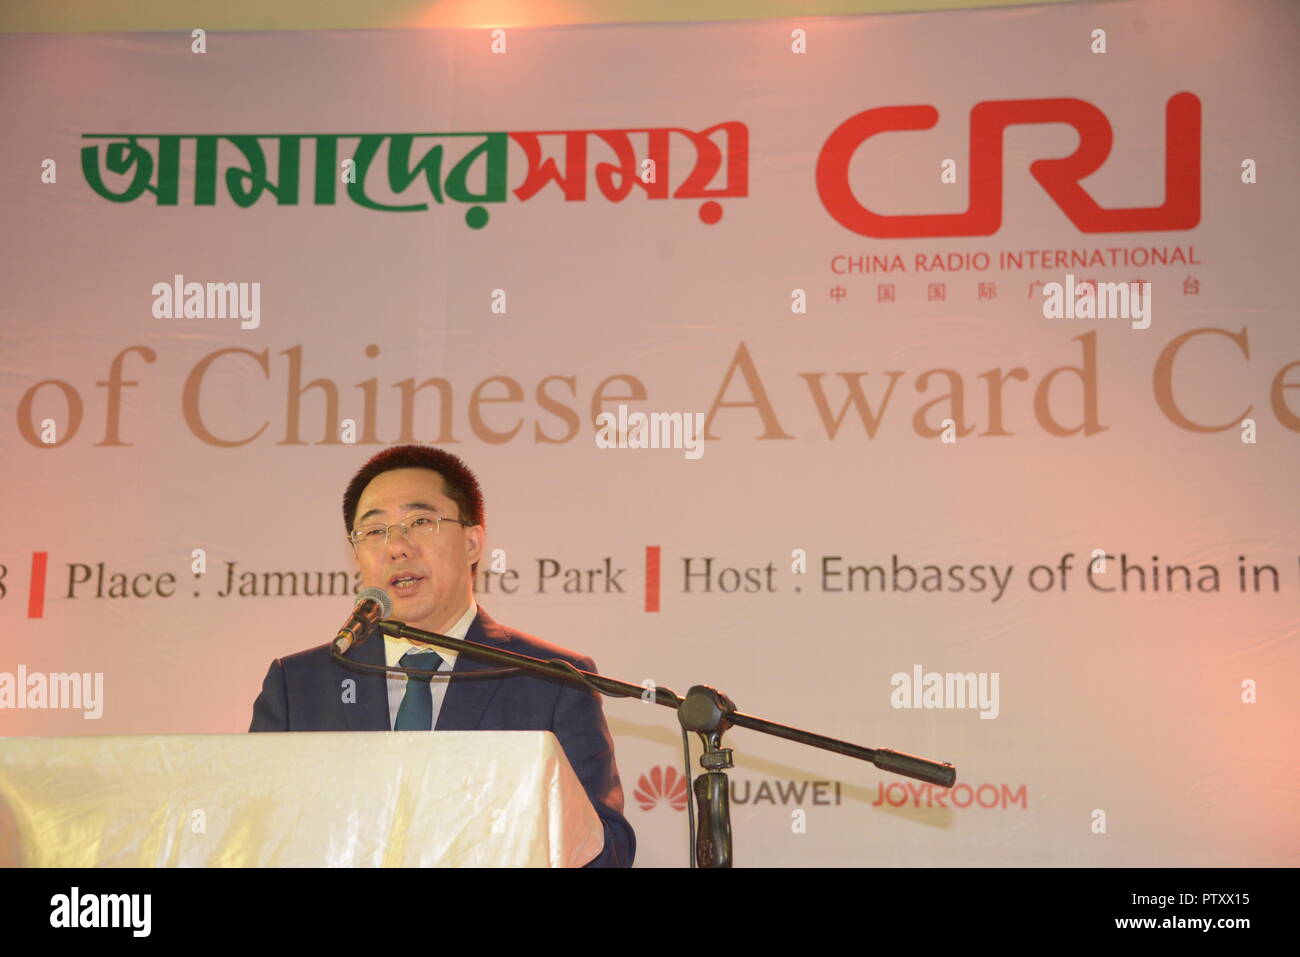 Dhaka. 11th Nov, 2018. Chinese Ambassador to Bangladesh Zhang Zuo speaks at an award ceremony of a general knowledge contest in Dhaka, Bangladesh, Nov. 10, 2018. CRI has held a general knowledge contest titled 'Charm of Chinese' in Bangladesh recently. On Saturday night at a ceremony hosted by the Chinese Embassy in Dhaka, winners of the contest were given certificates and prizes. Credit: Xinhua/Alamy Live News Stock Photo